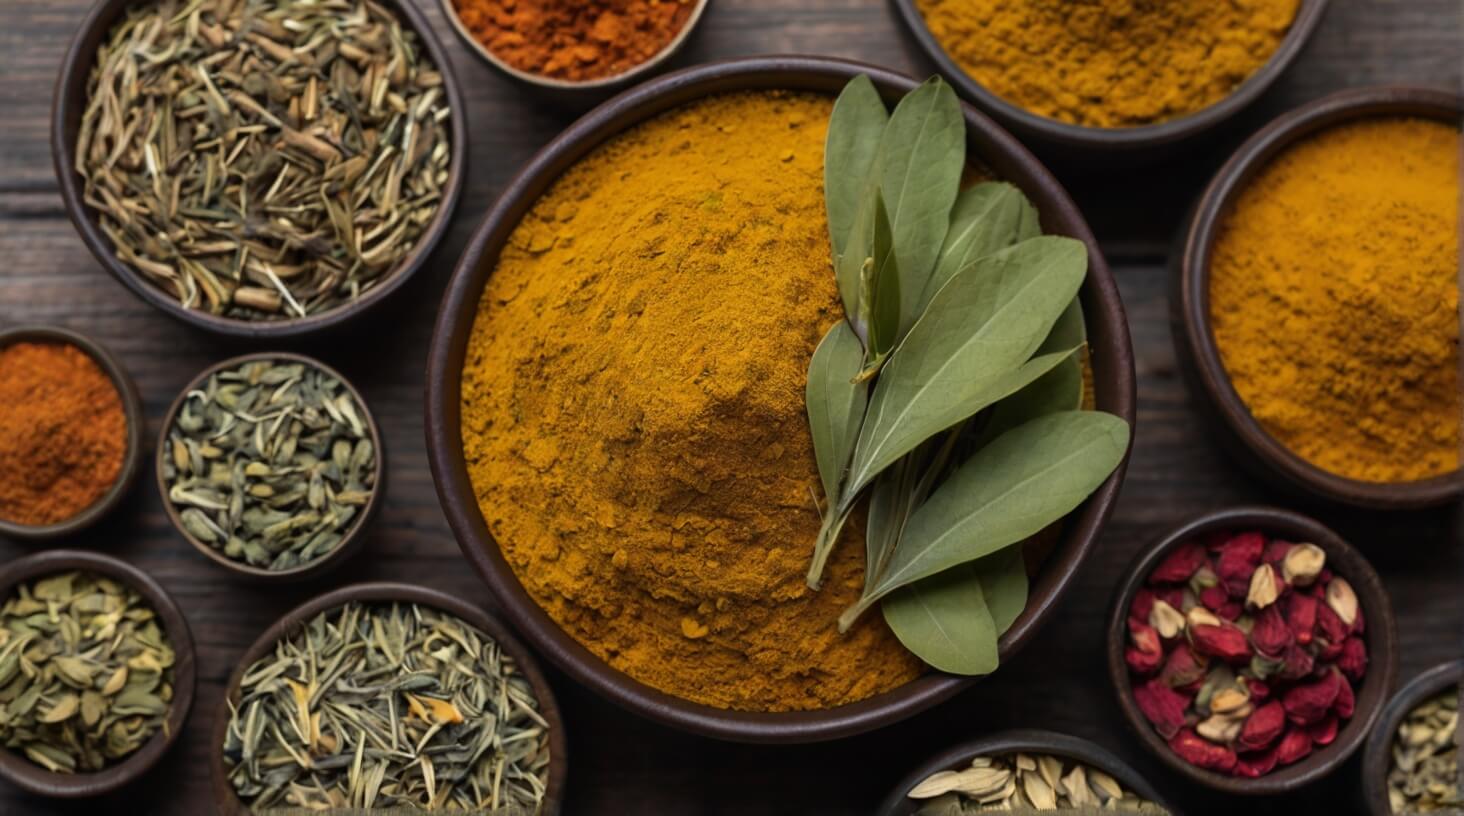 A variety of colorful herbs arranged in a vibrant display, including turmeric, ginger, and cinnamon, renowned for their potent anti-inflammatory properties.